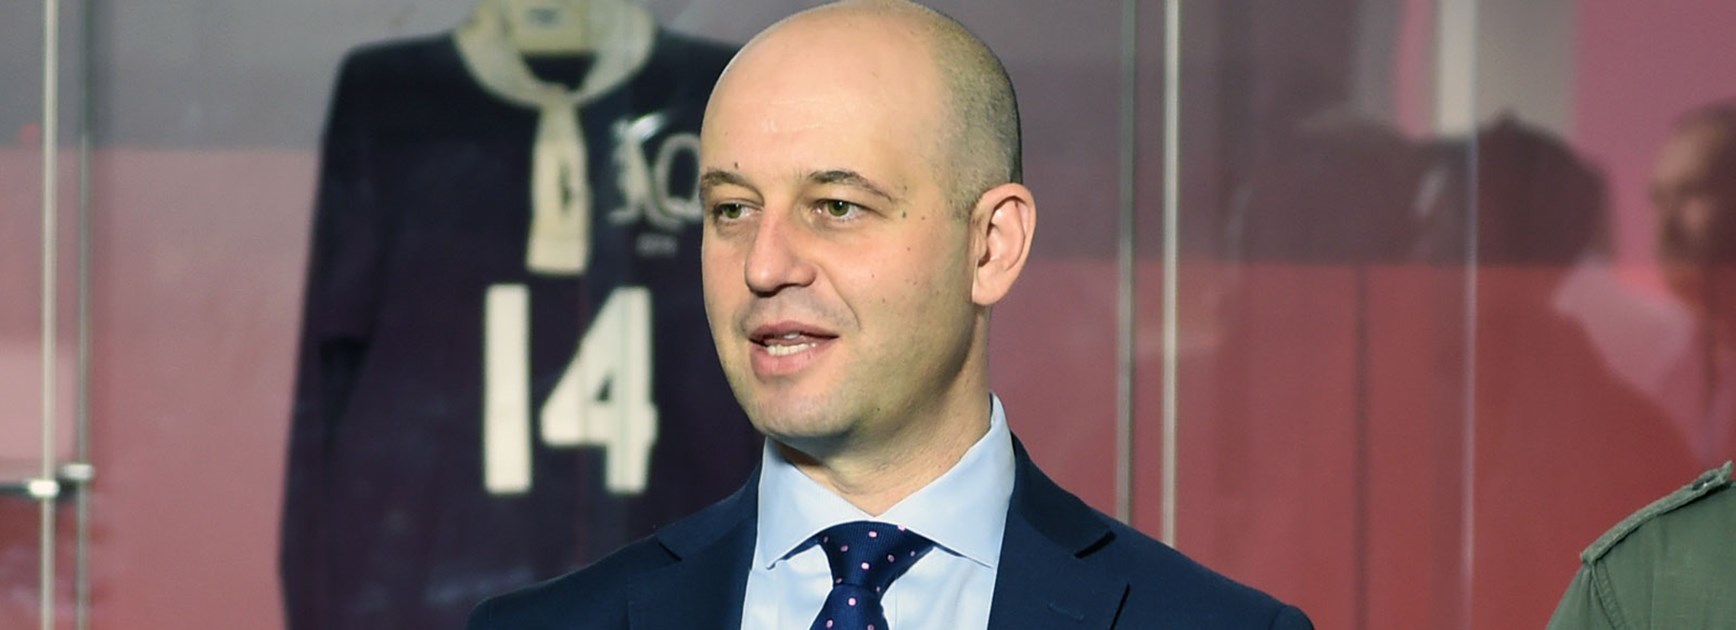 NRL CEO Todd Greenberg at the opening of Rugby League Central, Queensland.